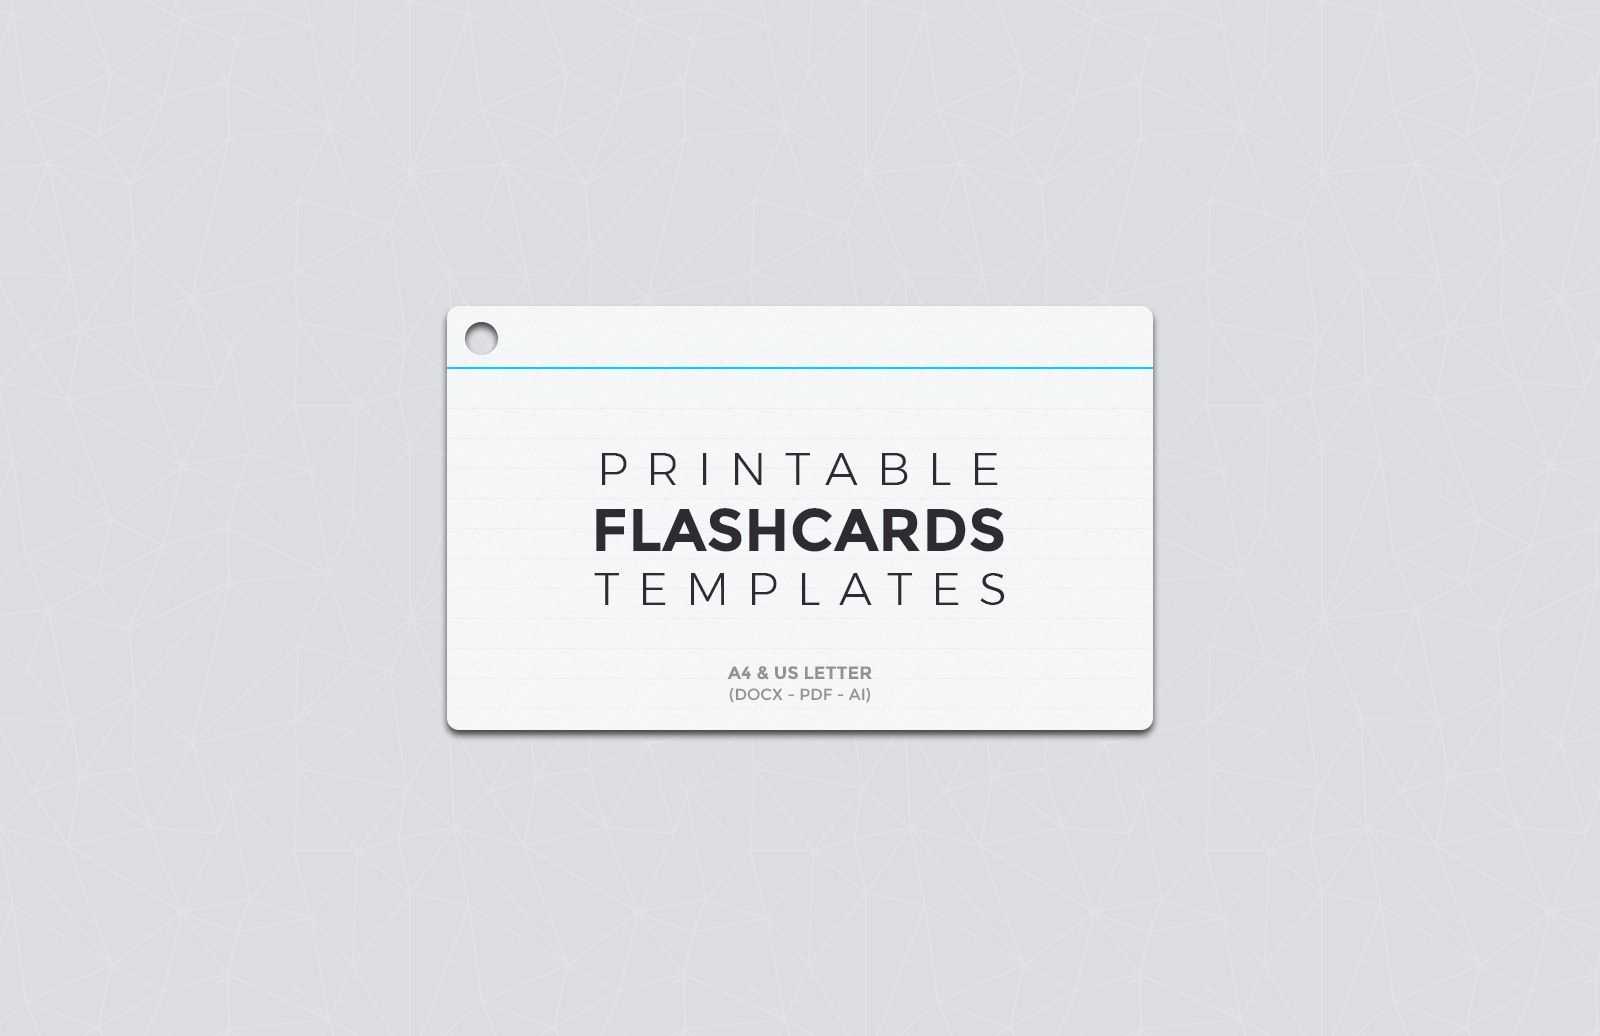 005 Printable Flash Card Template Top Ideas Word Alphabet Pertaining To Free Printable Flash Cards Template